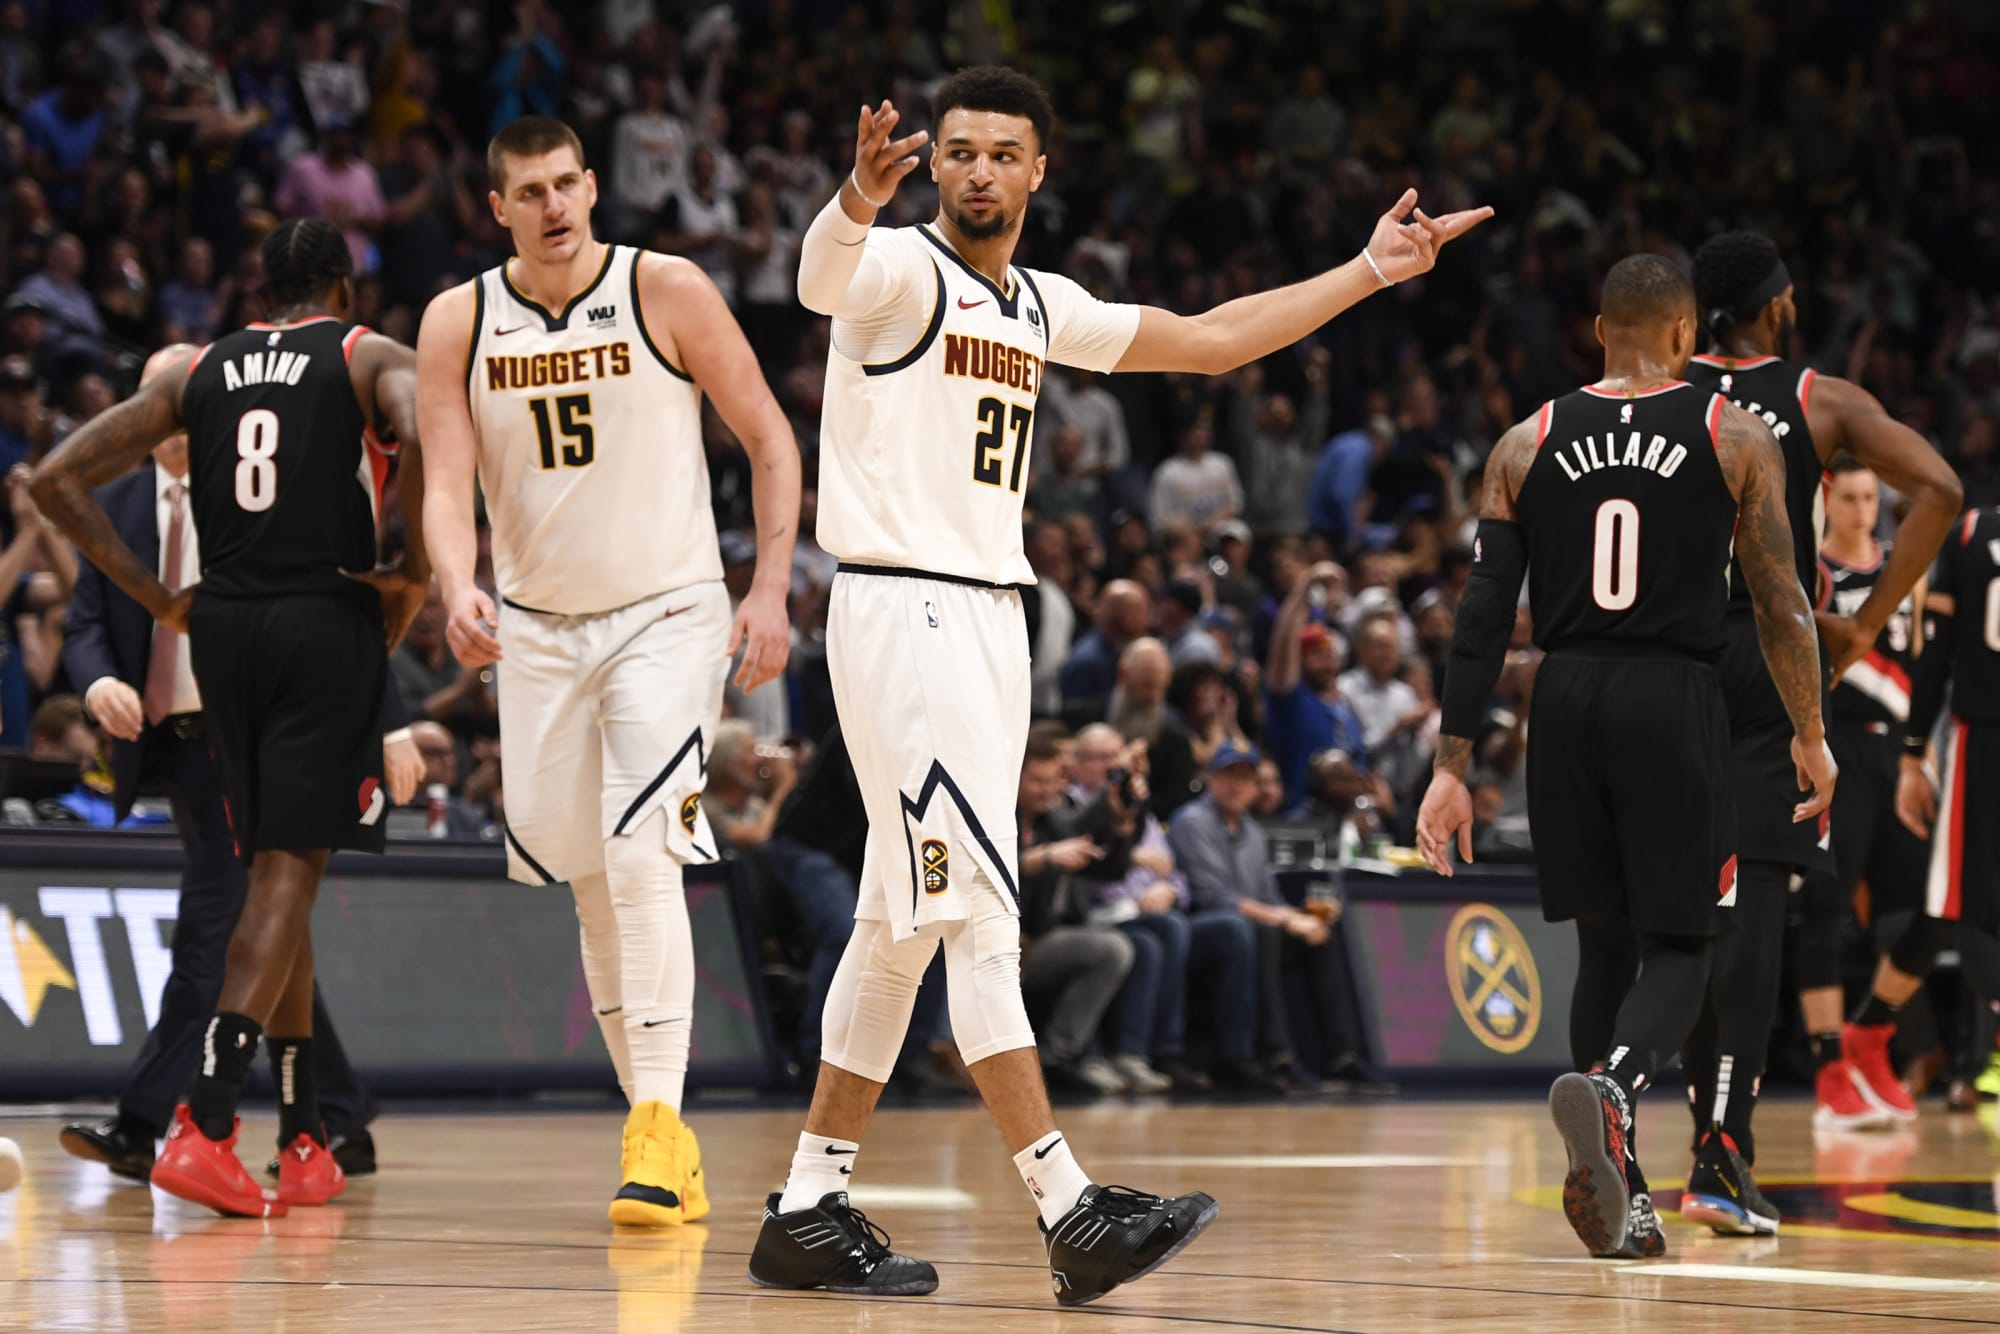 Nuggets make statement with huge Game 5 win over the Trail Blazers